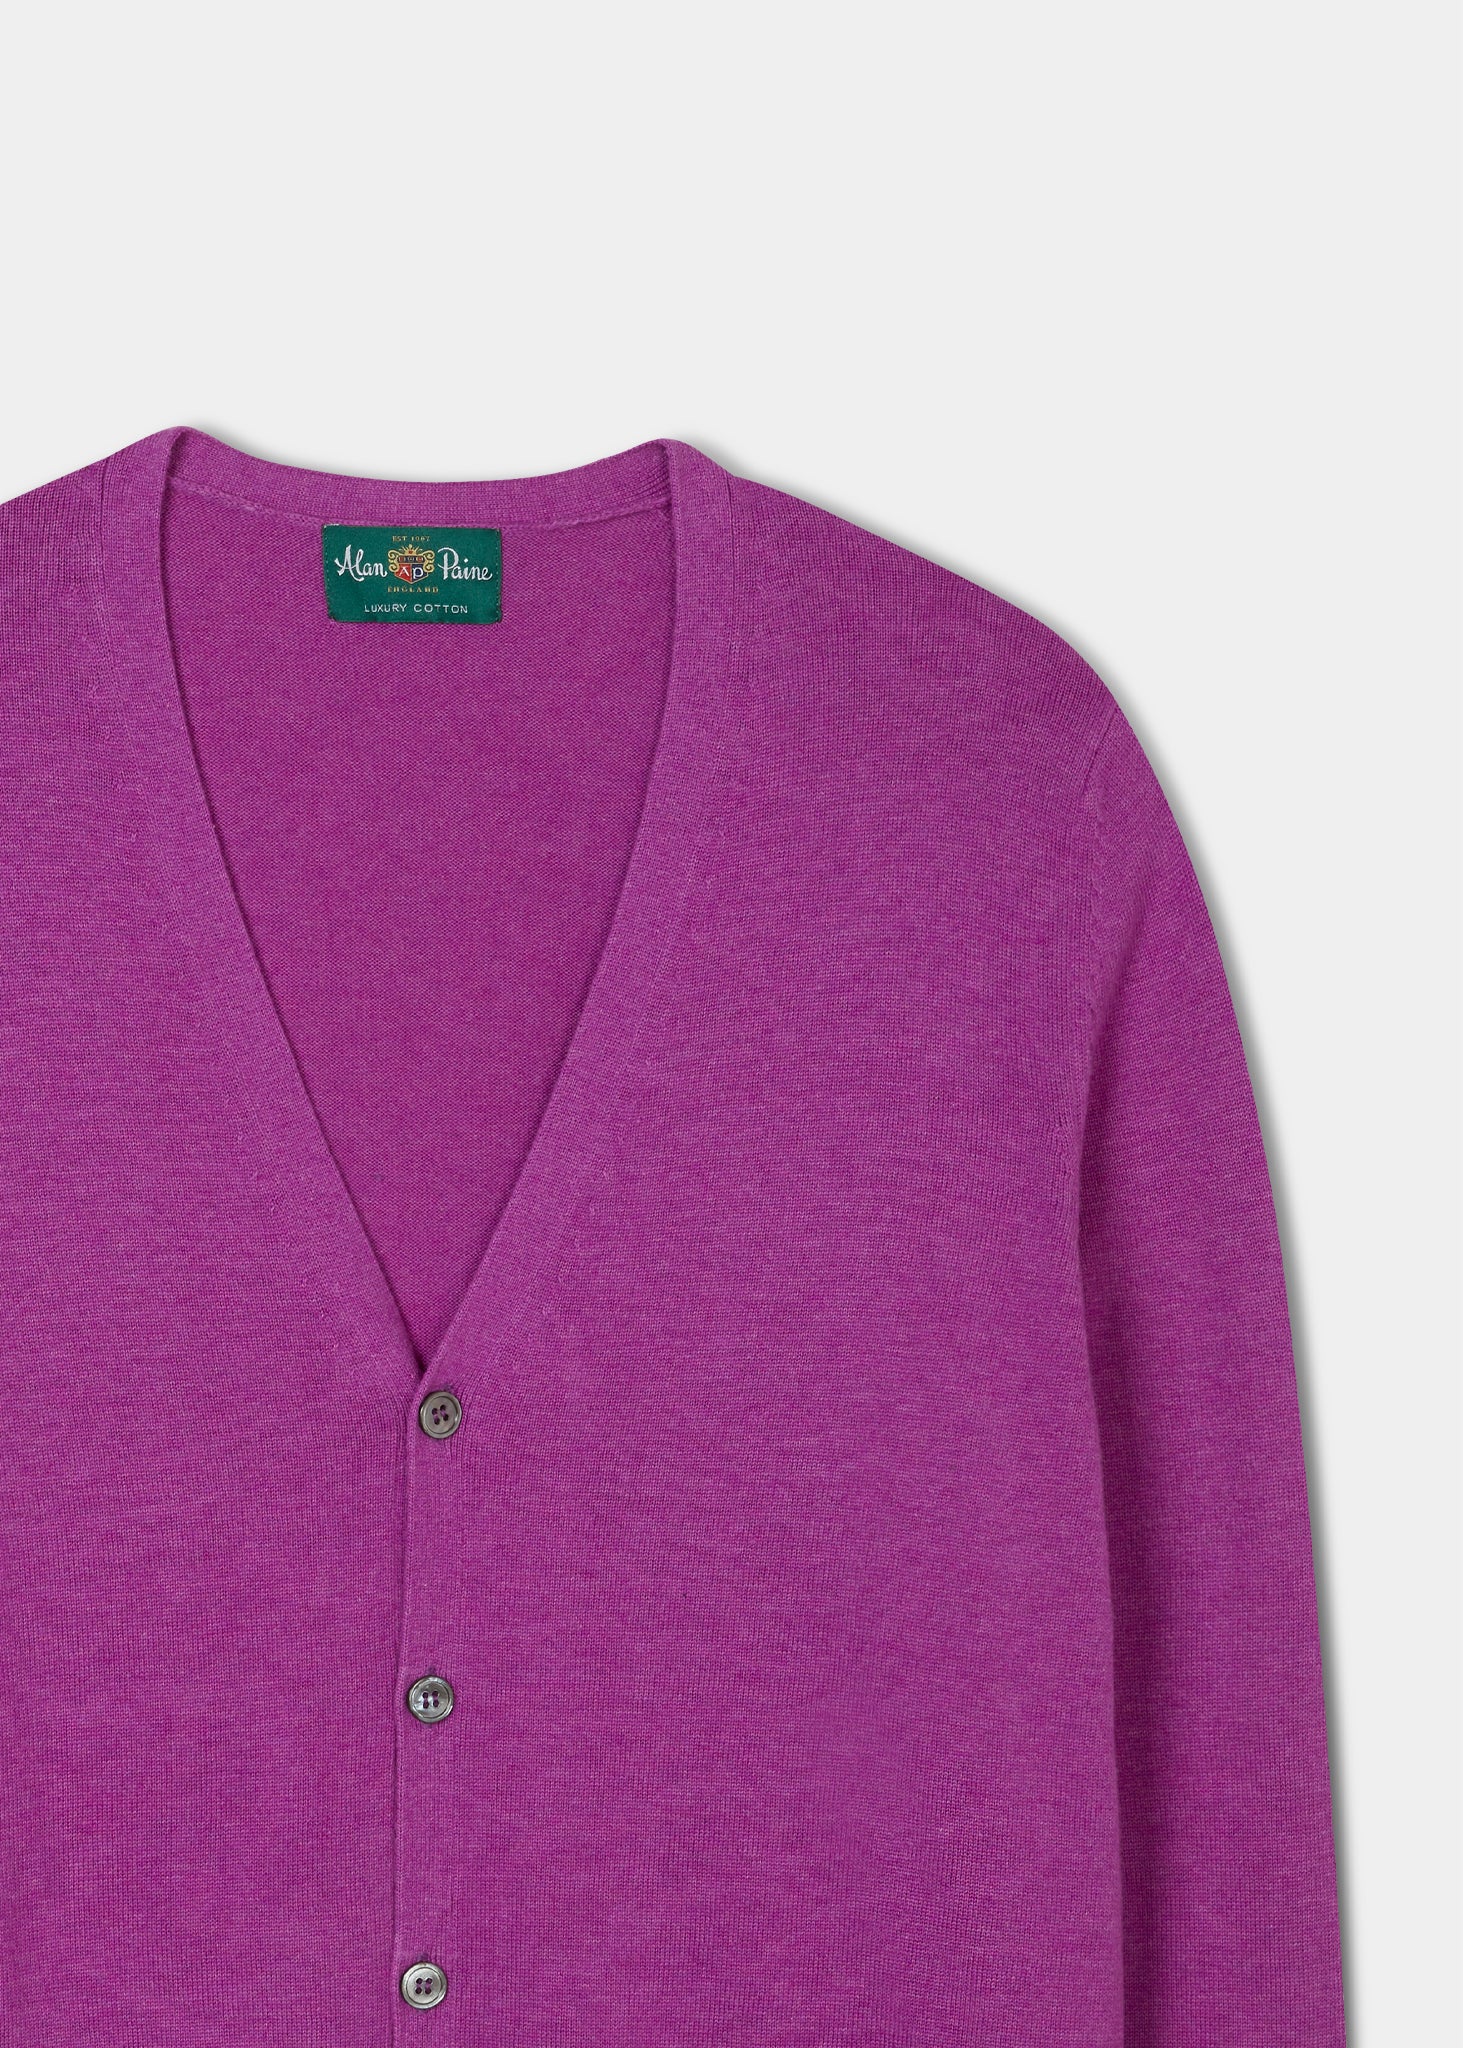 Alan Paine cotton cashmere cardigan in orchid